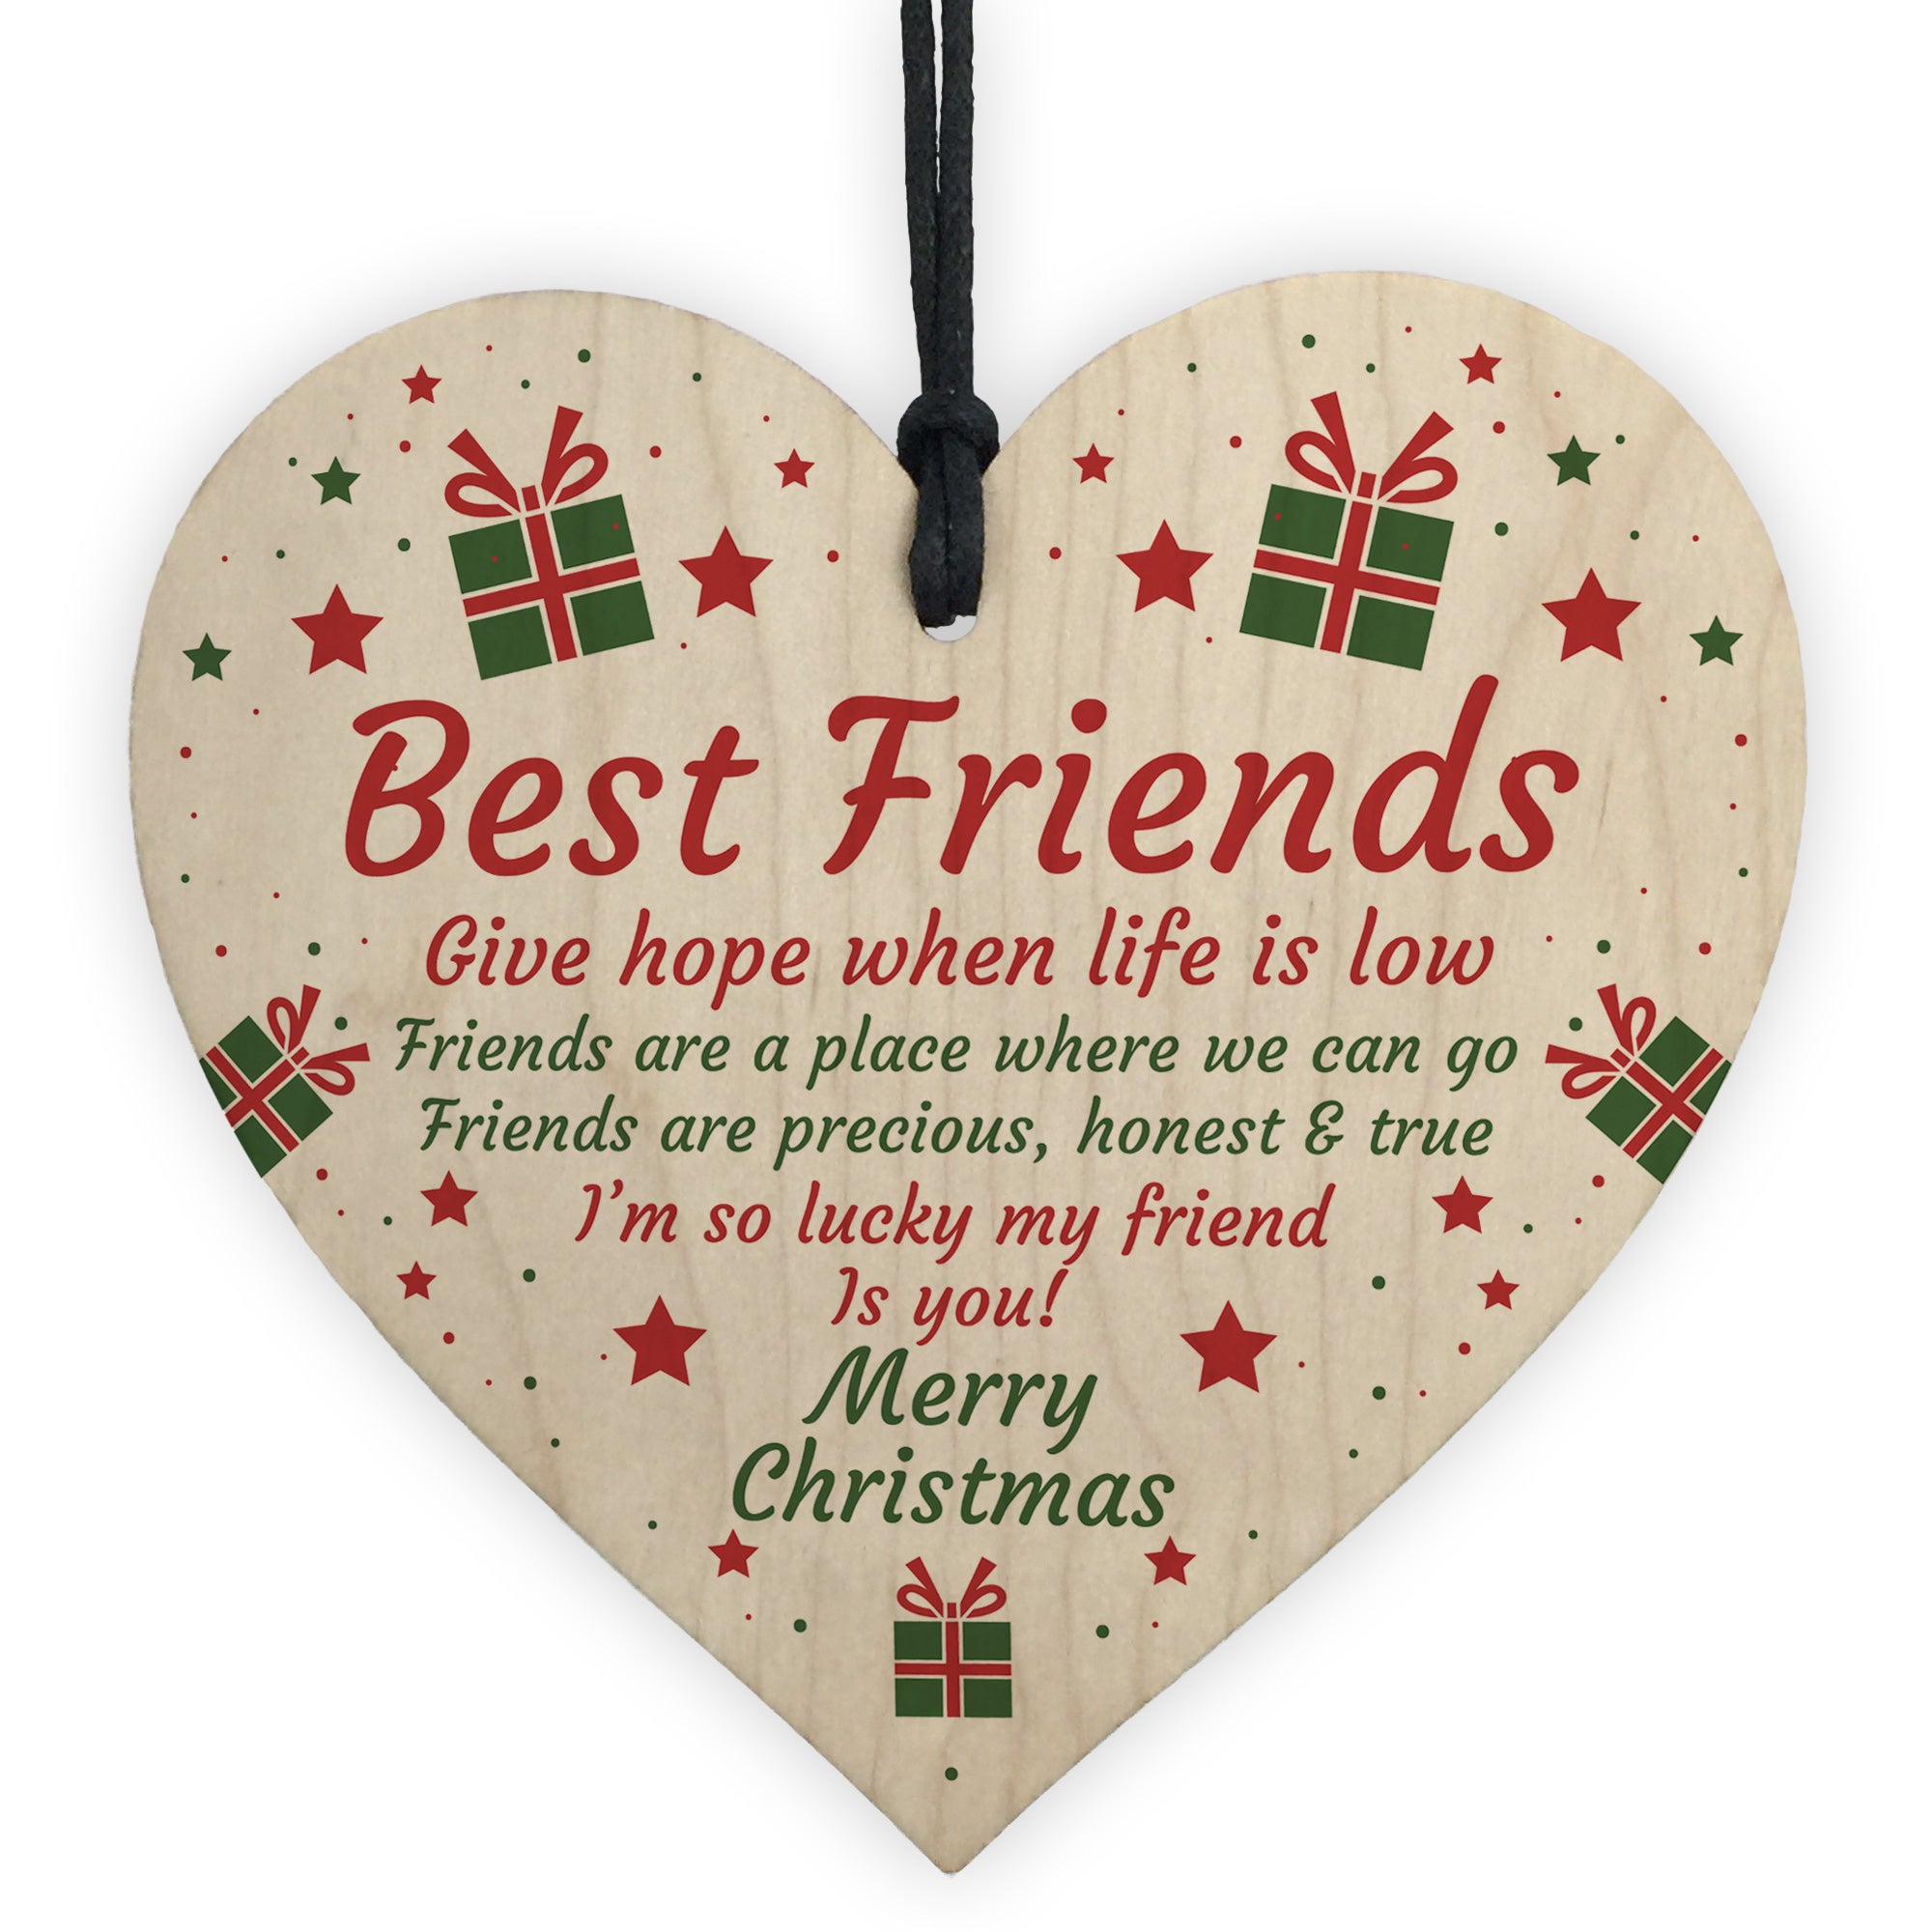 12 Unique Gift Ideas for Best Friends! - The Elegance